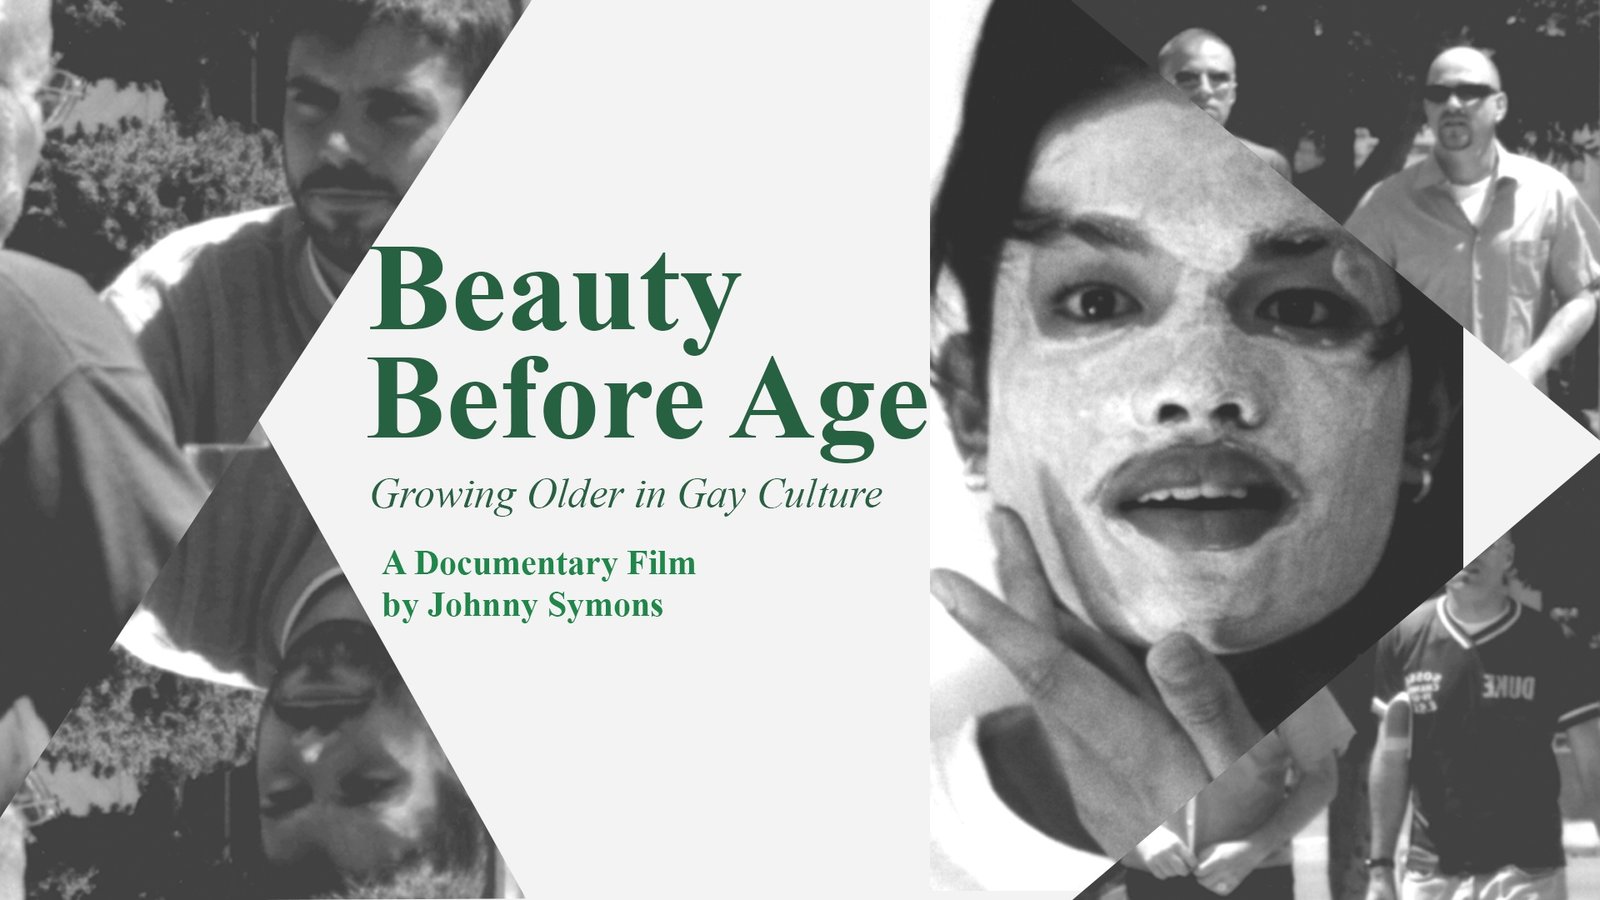 Beauty Before Age - Growing Older in Gay Culture